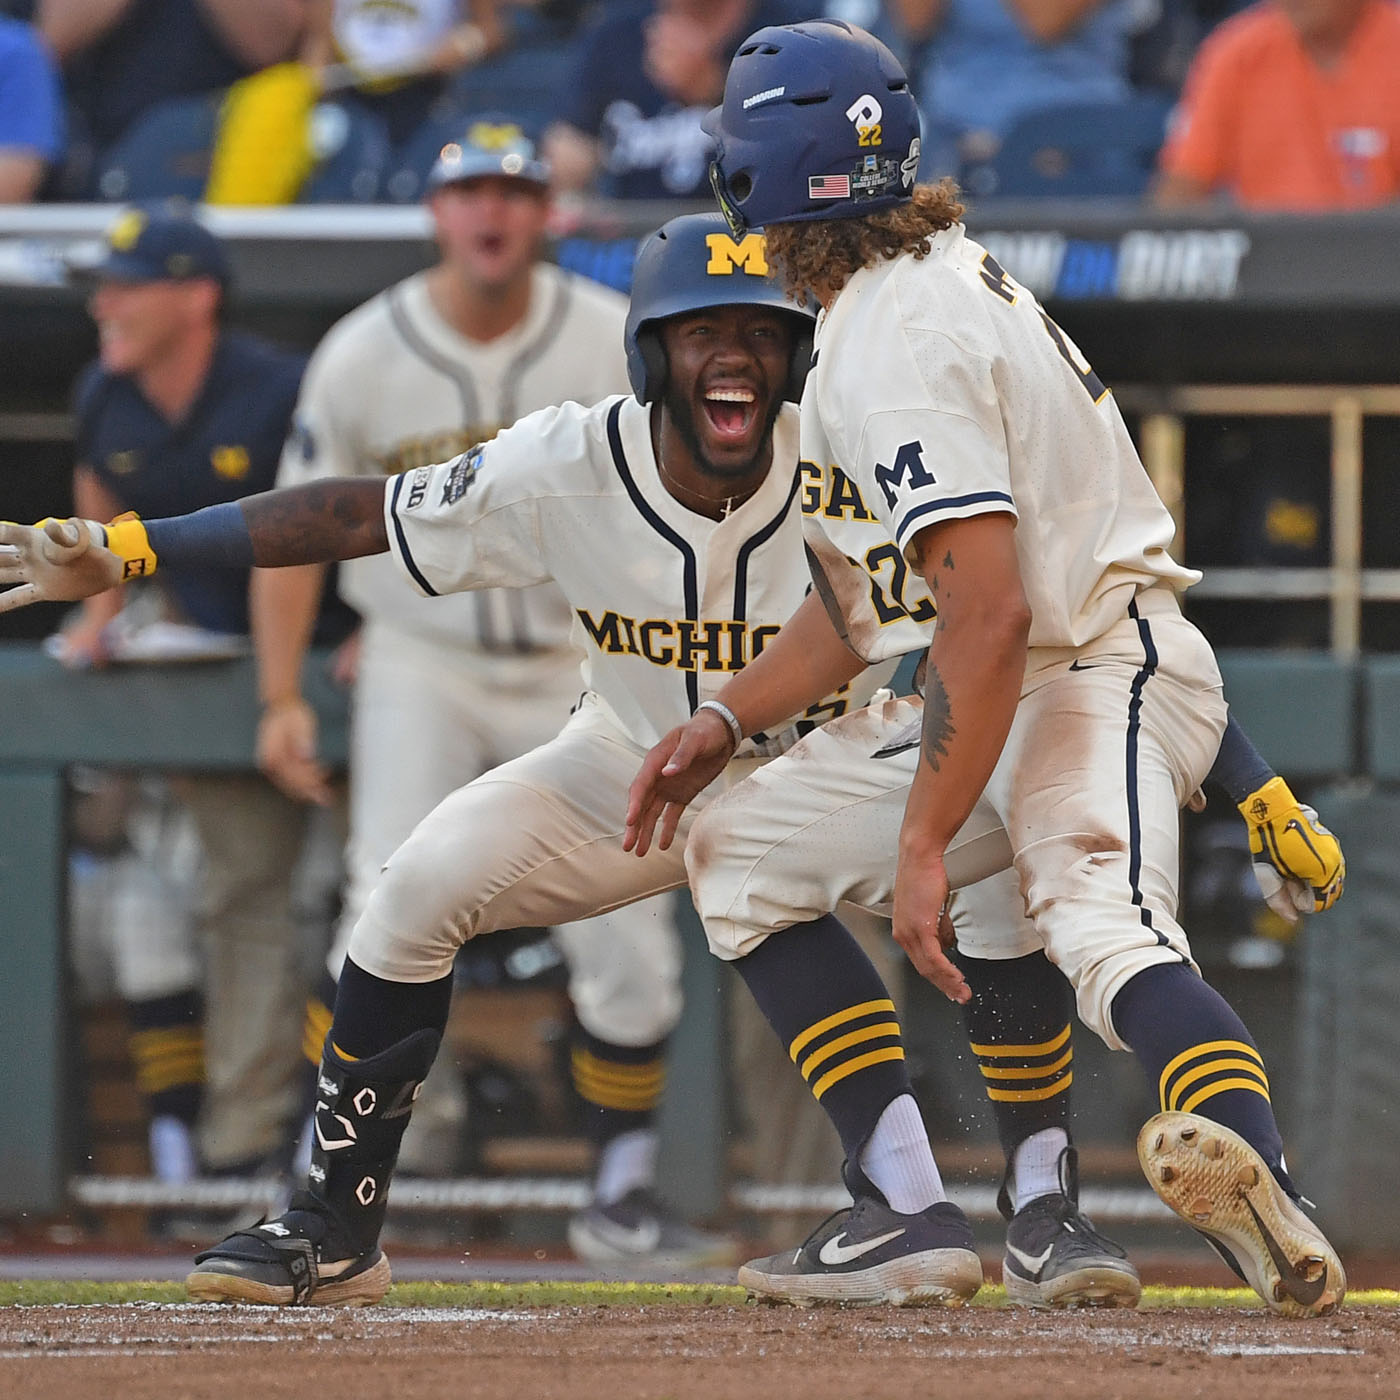 Game 1: Michigan closes out a 7-4 win